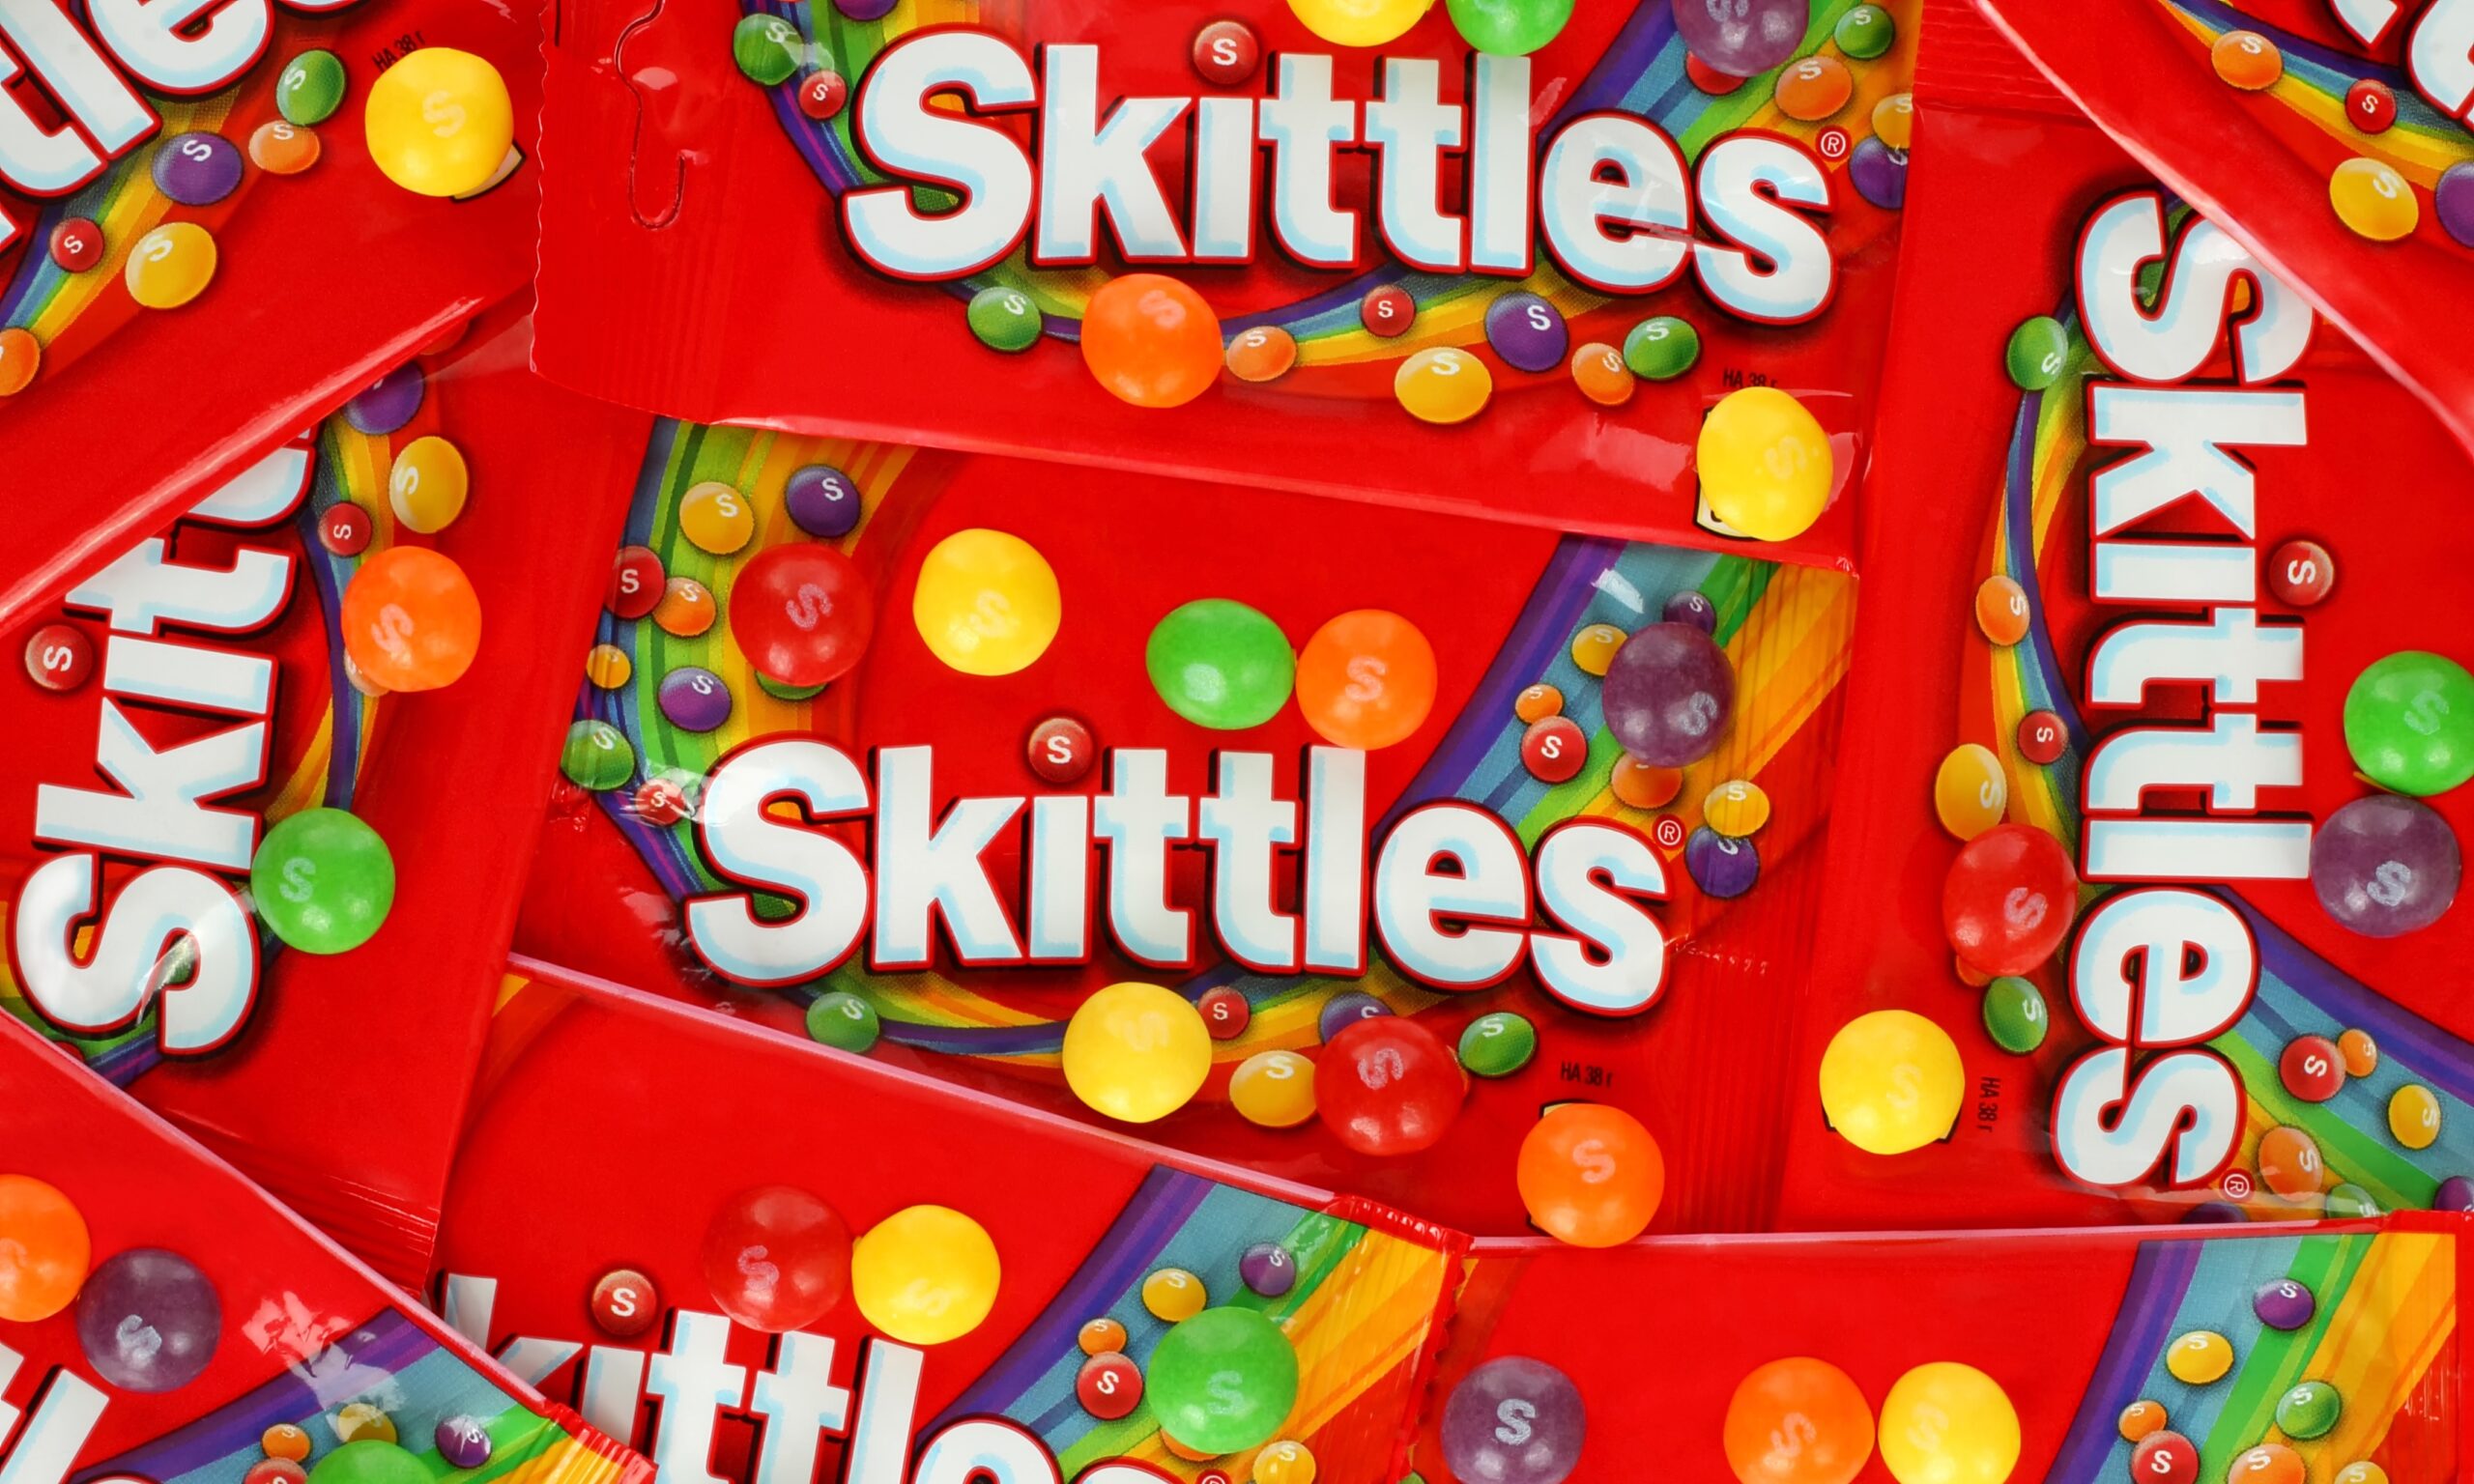 A pile of red bags of Skittles, pictured up close.